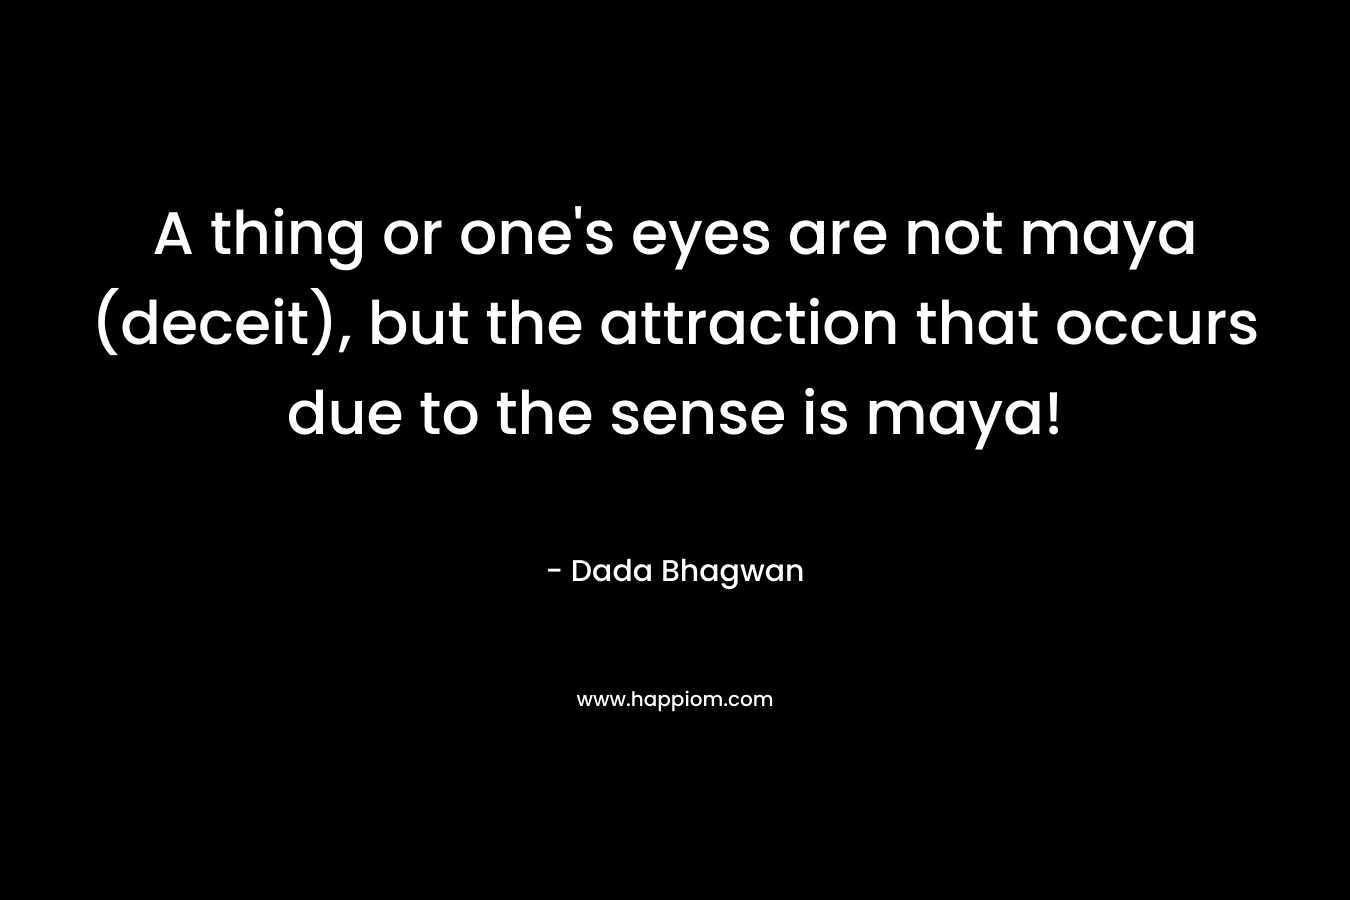 A thing or one's eyes are not maya (deceit), but the attraction that occurs due to the sense is maya!